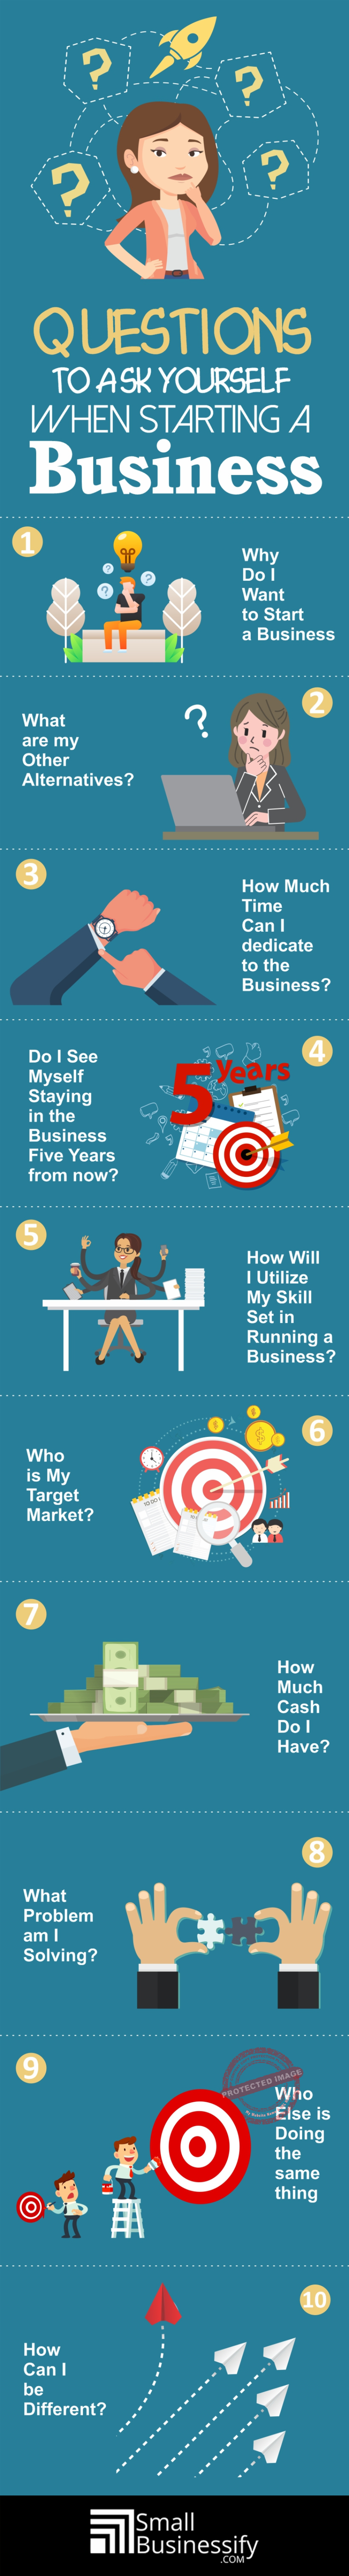 Questions to ask yourself when starting a business infographic